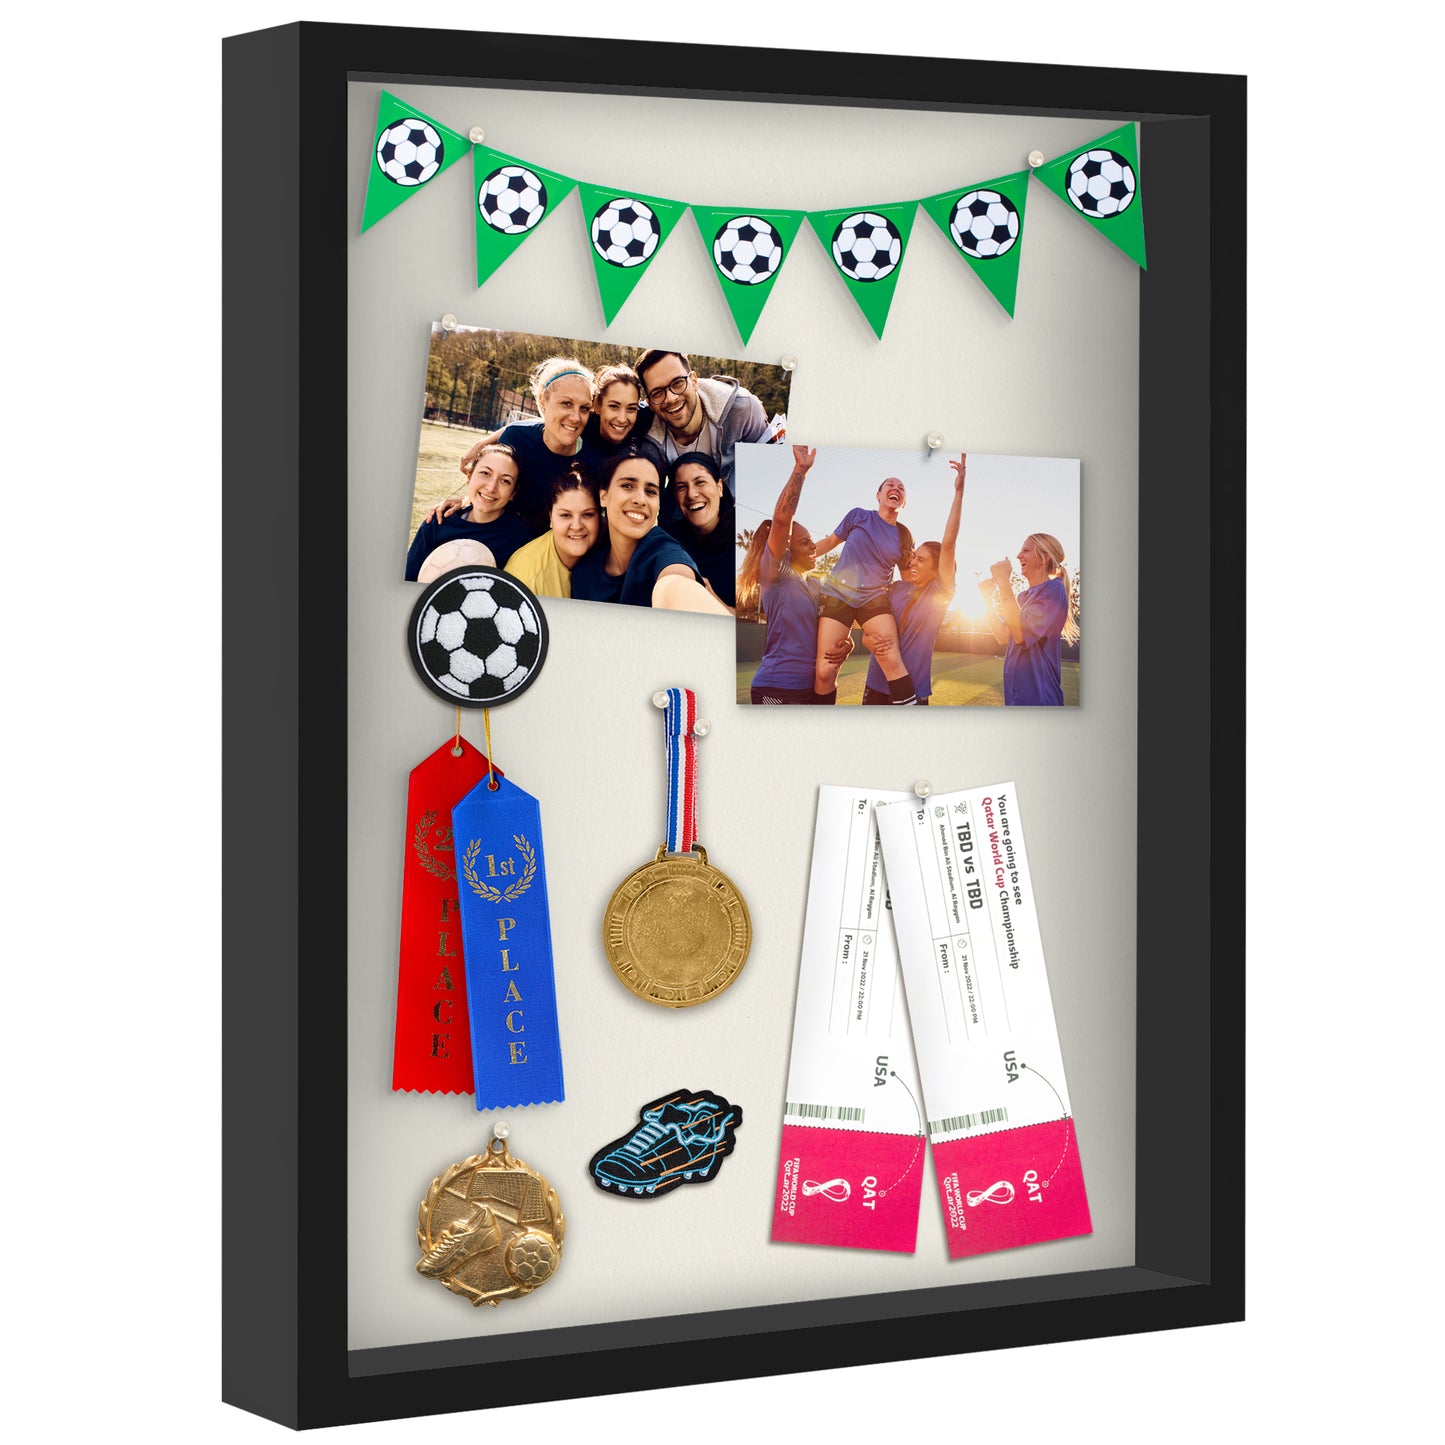 Shadow Box Frame Engineered Wood and Plexiglass Cover for Objects Pictures and Memorabilia